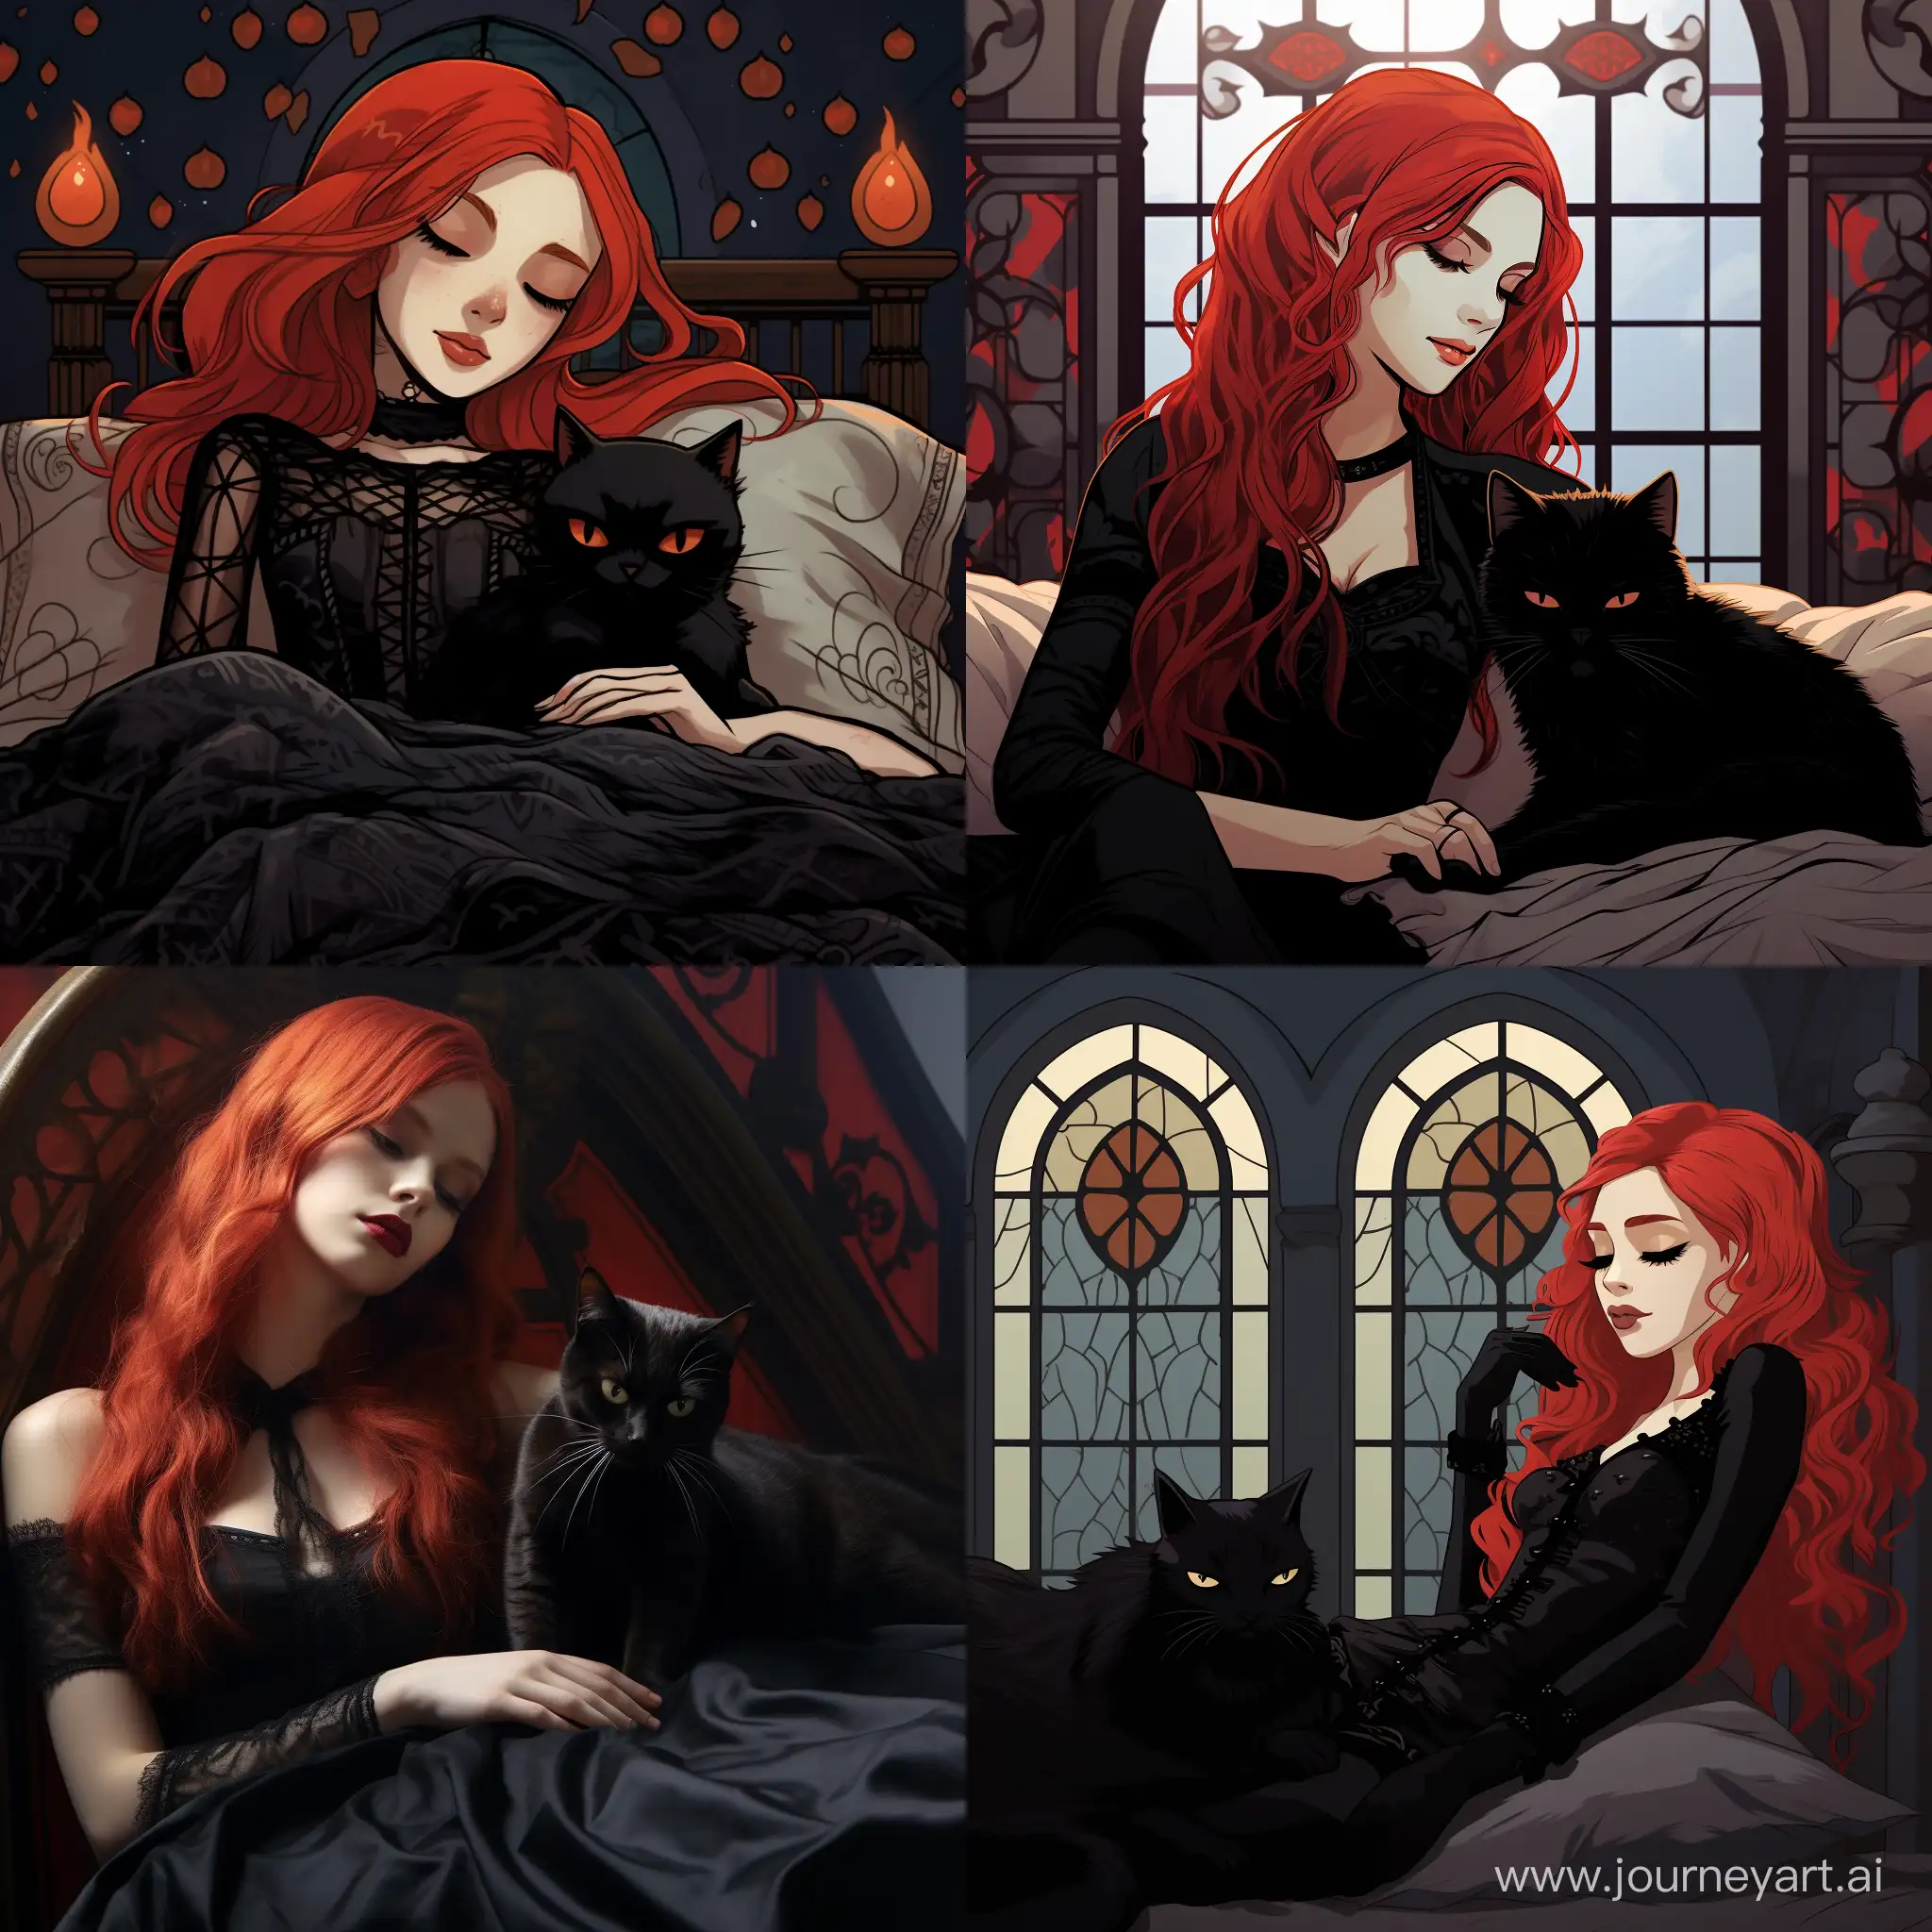 RedHaired-Gothic-Girl-Sleeping-Beside-GothicStyle-Cat-on-Bed